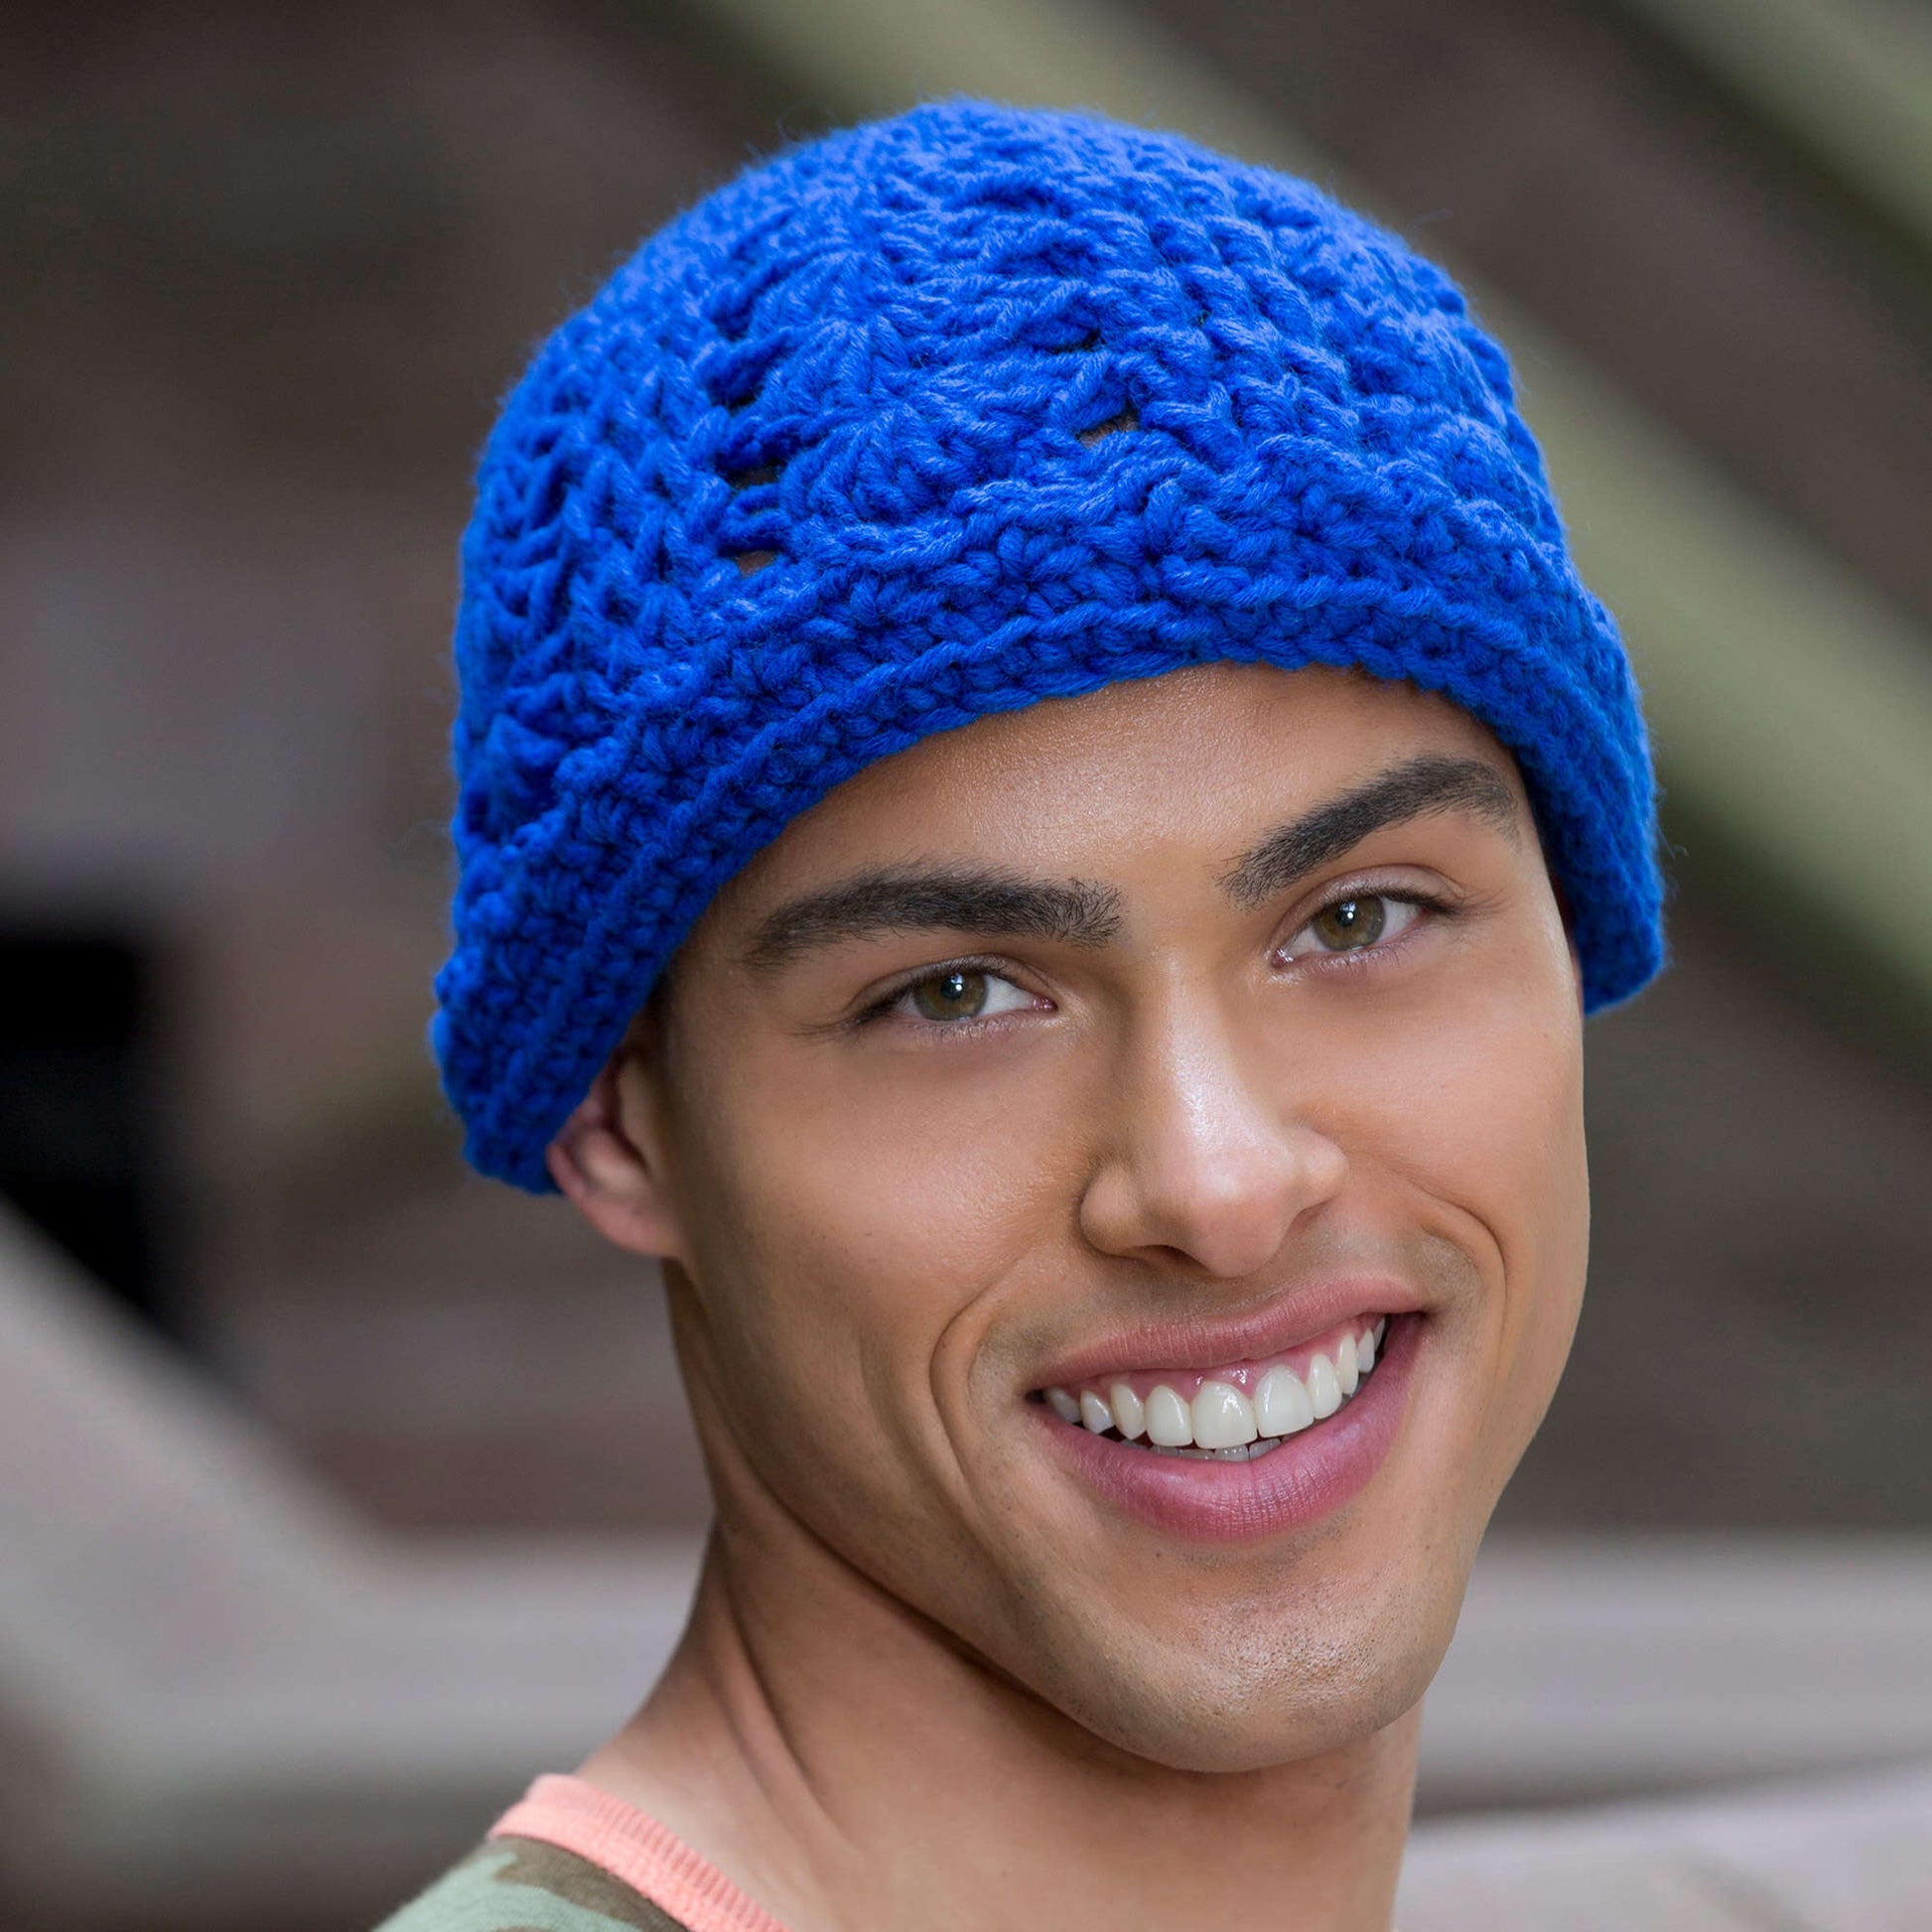 Free Red Heart Crochet Beanie With A Dash Pattern